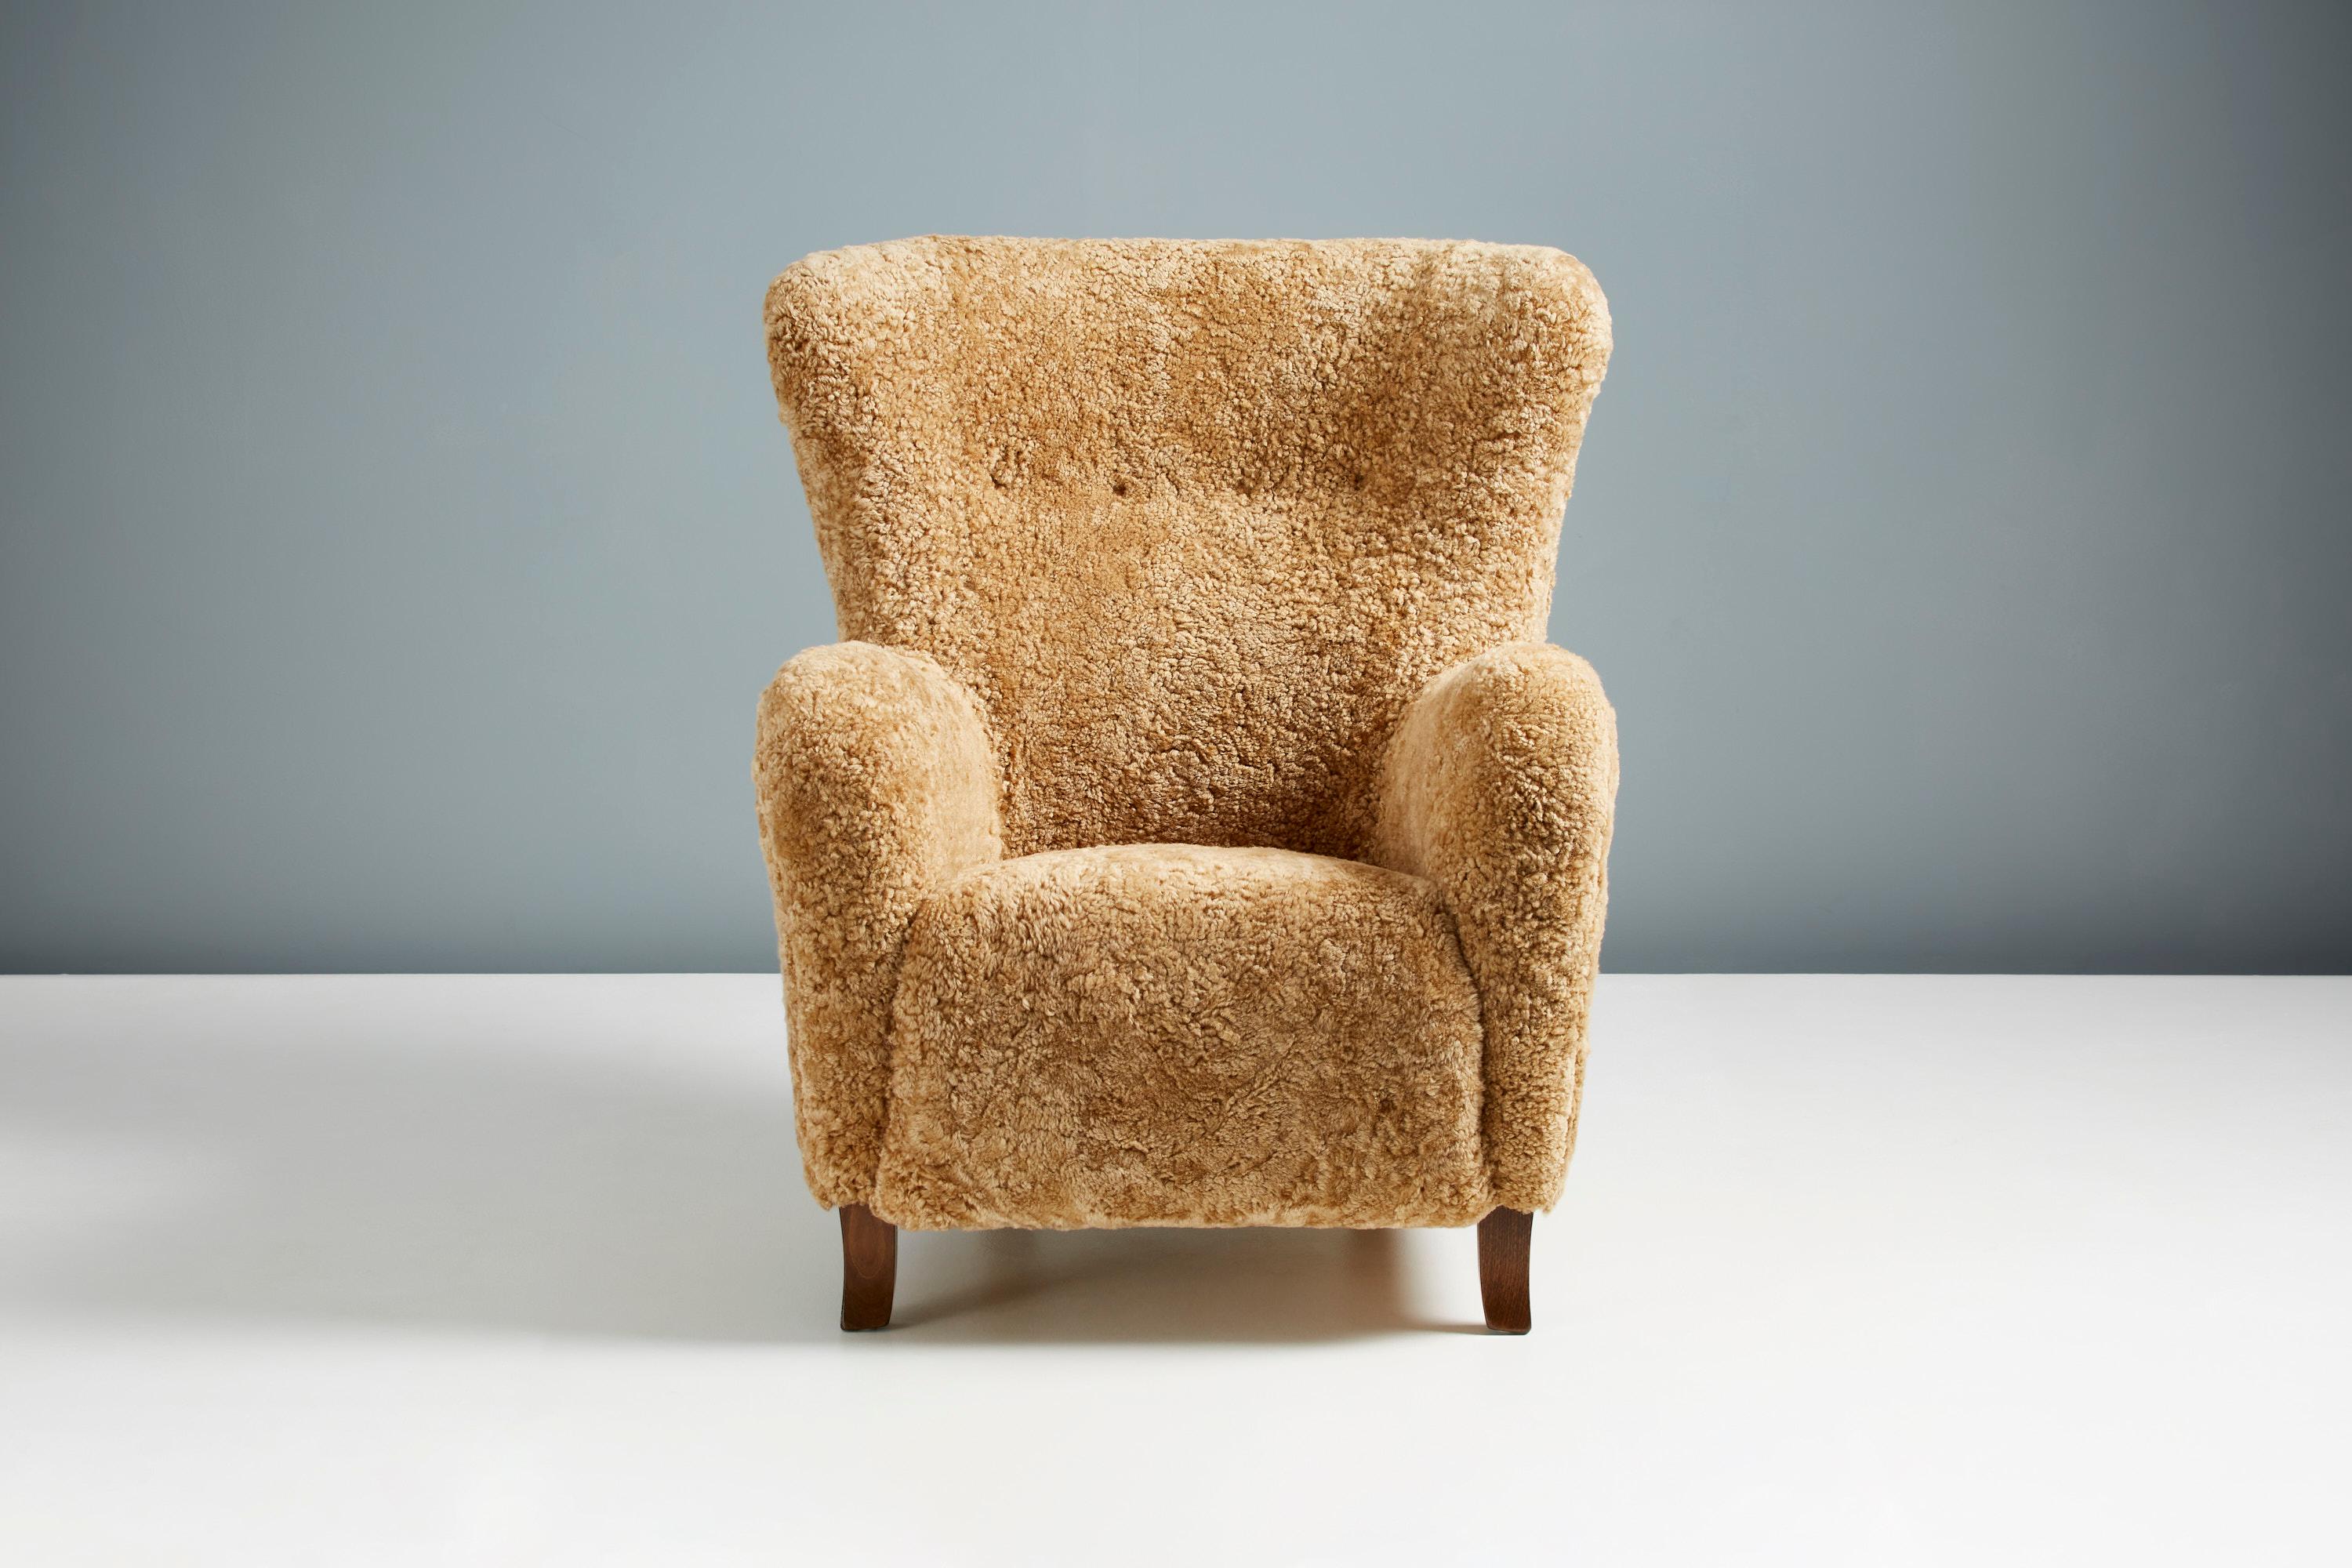 Dagmar Design Sampo wing chair

A custom-made wing chair developed & produced at our workshops in London using the highest quality materials. The frame is built from solid beech wood with a fully sprung seat. The Sampo chair is available to order in